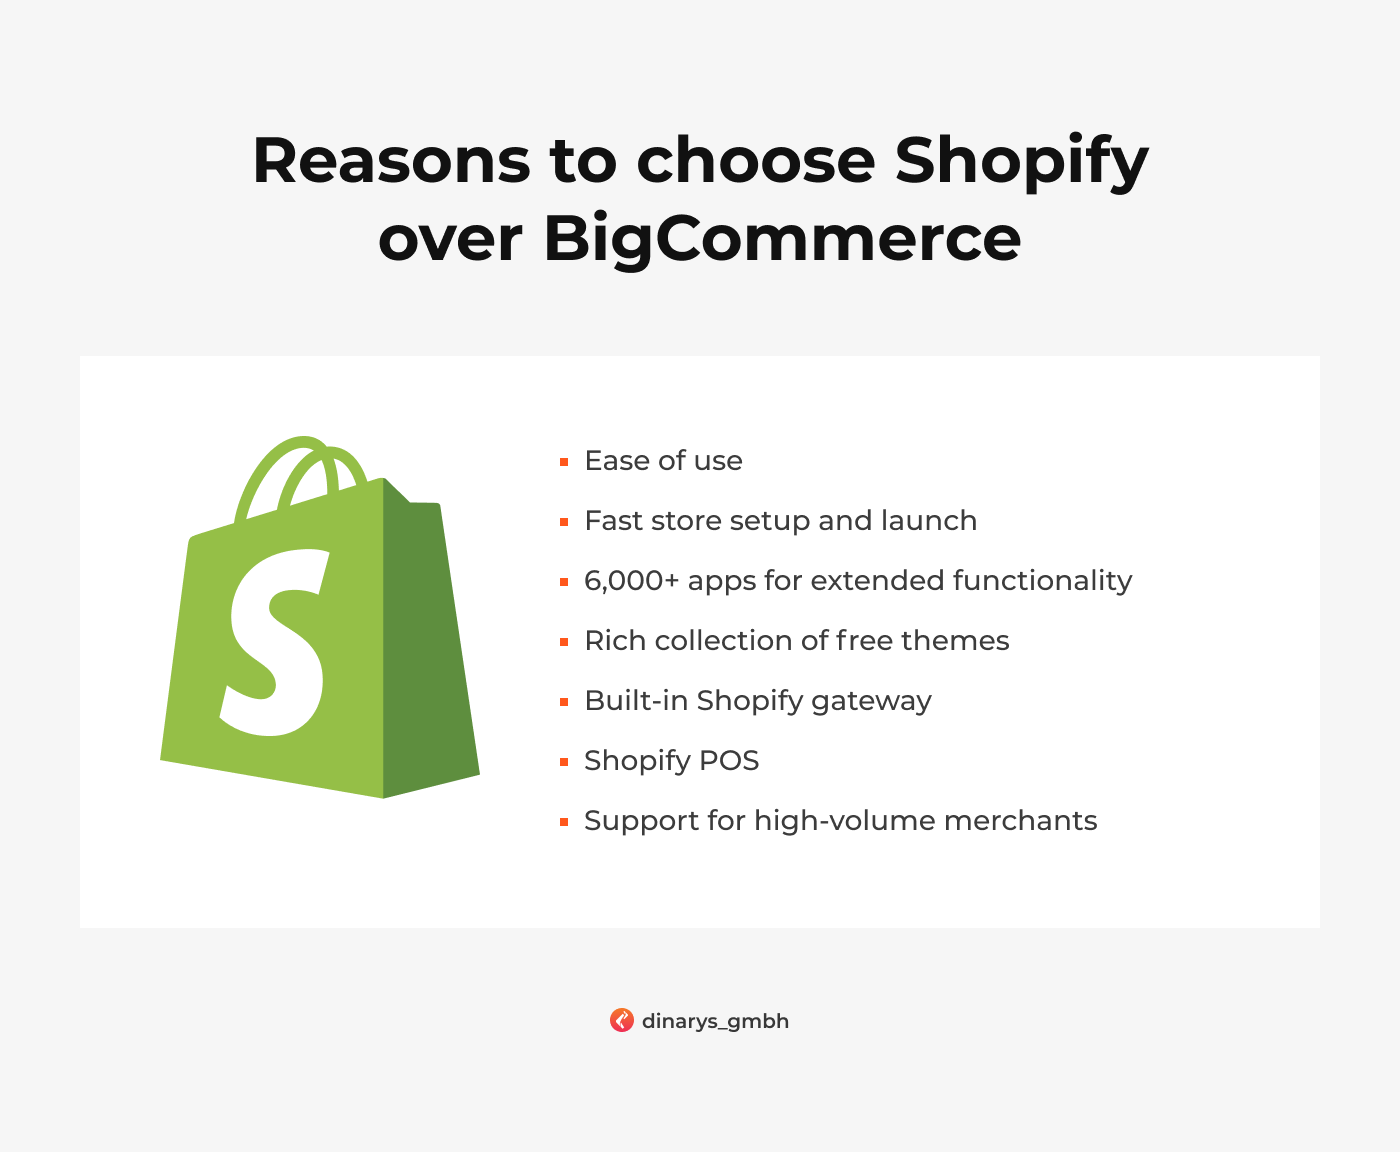 Reasons to choose Shopify over BigCommerce